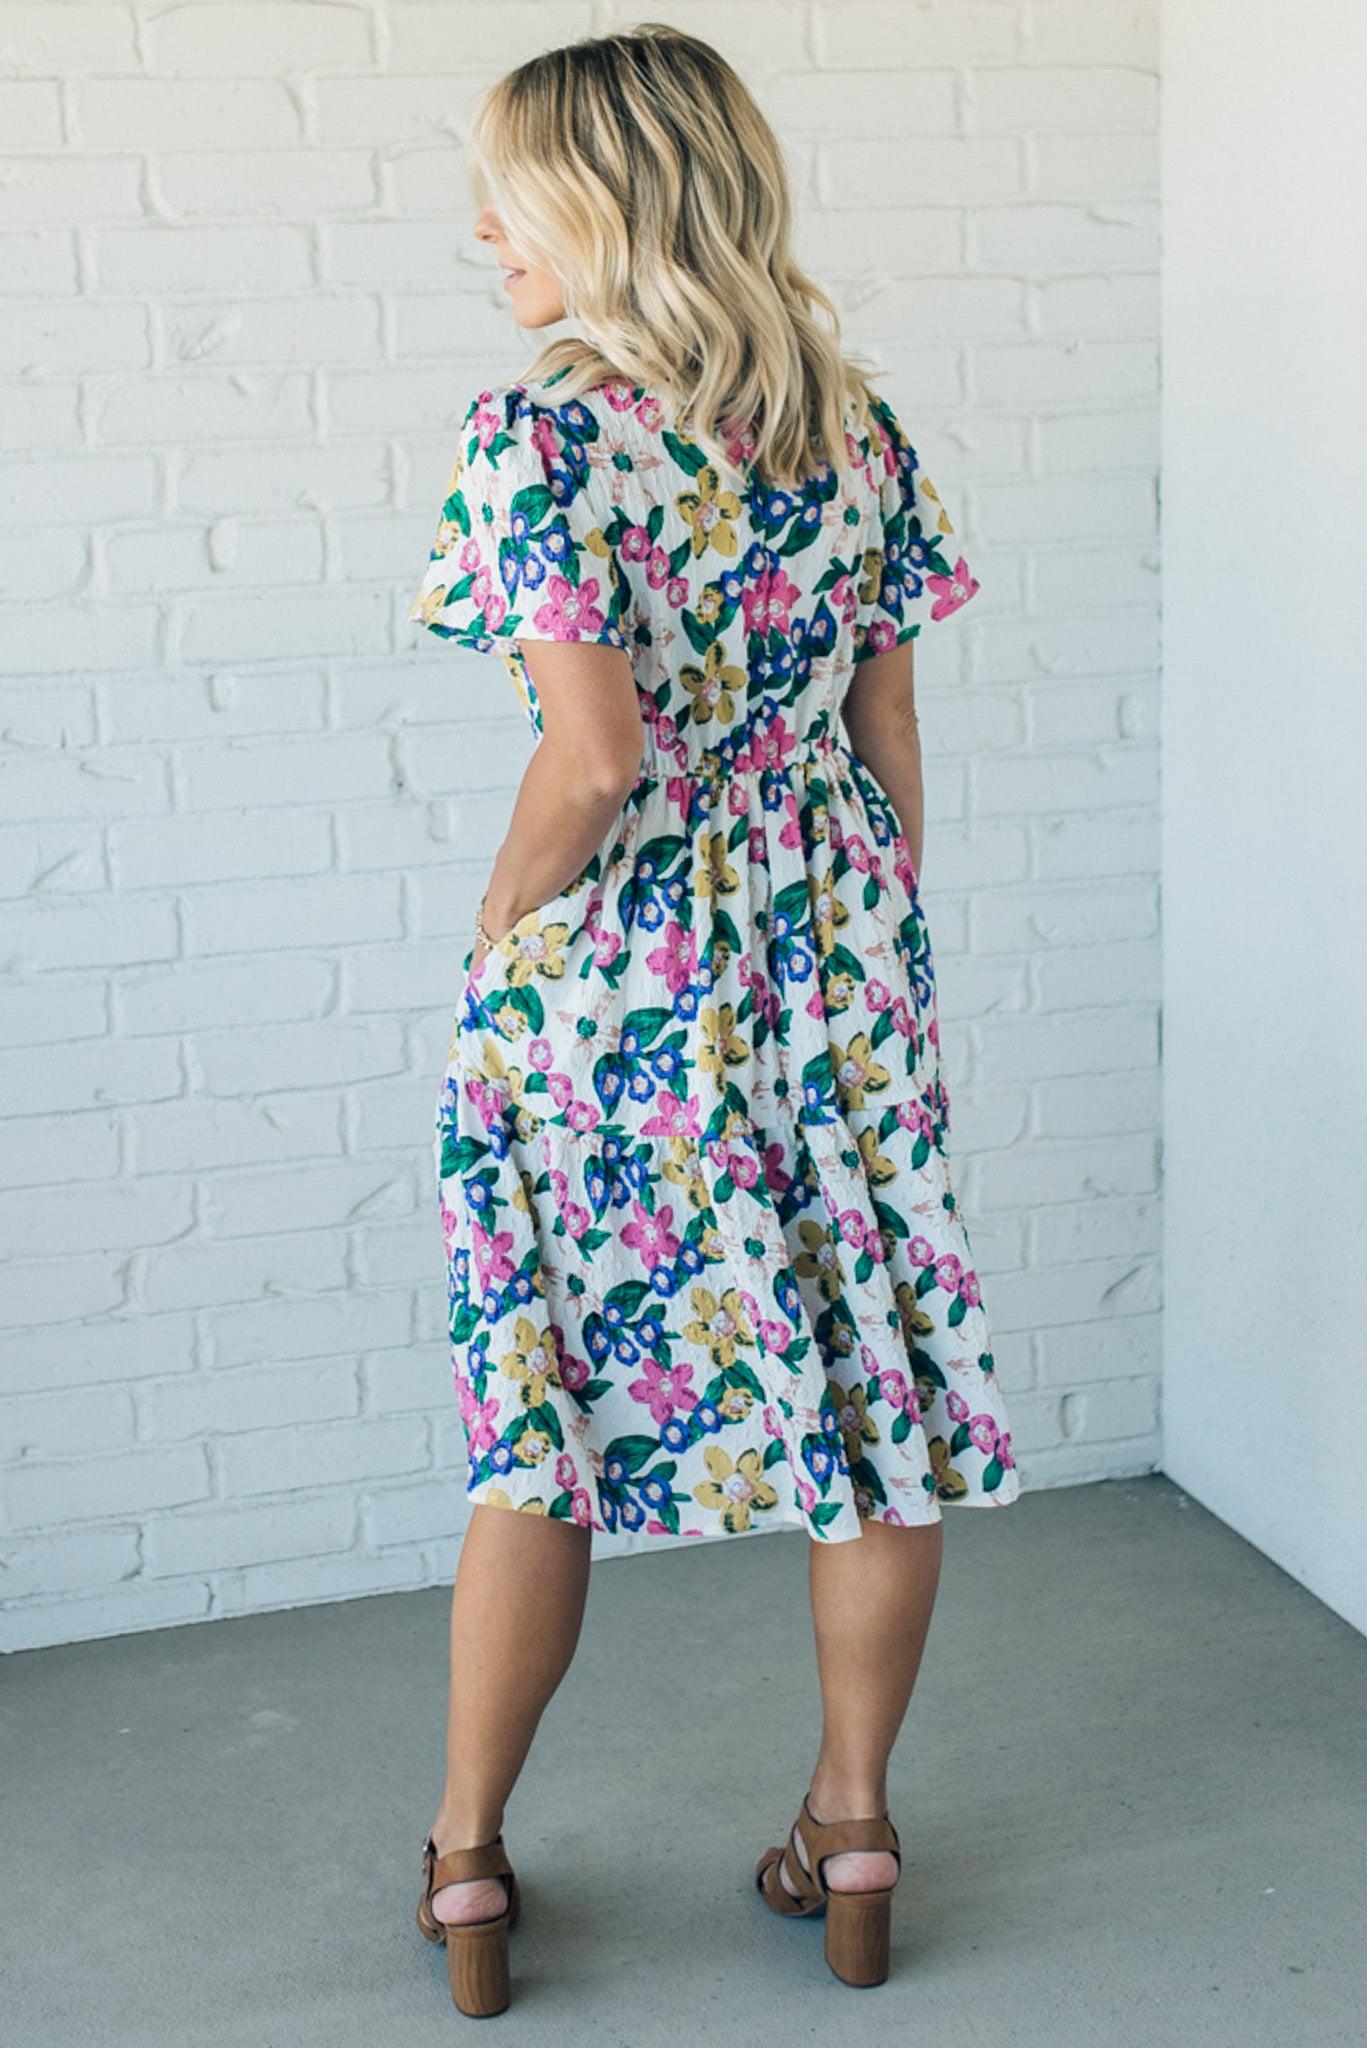 Women wearing a short sleeve midi dress that is Ivory with purple, pink and yellow flowers throughout.